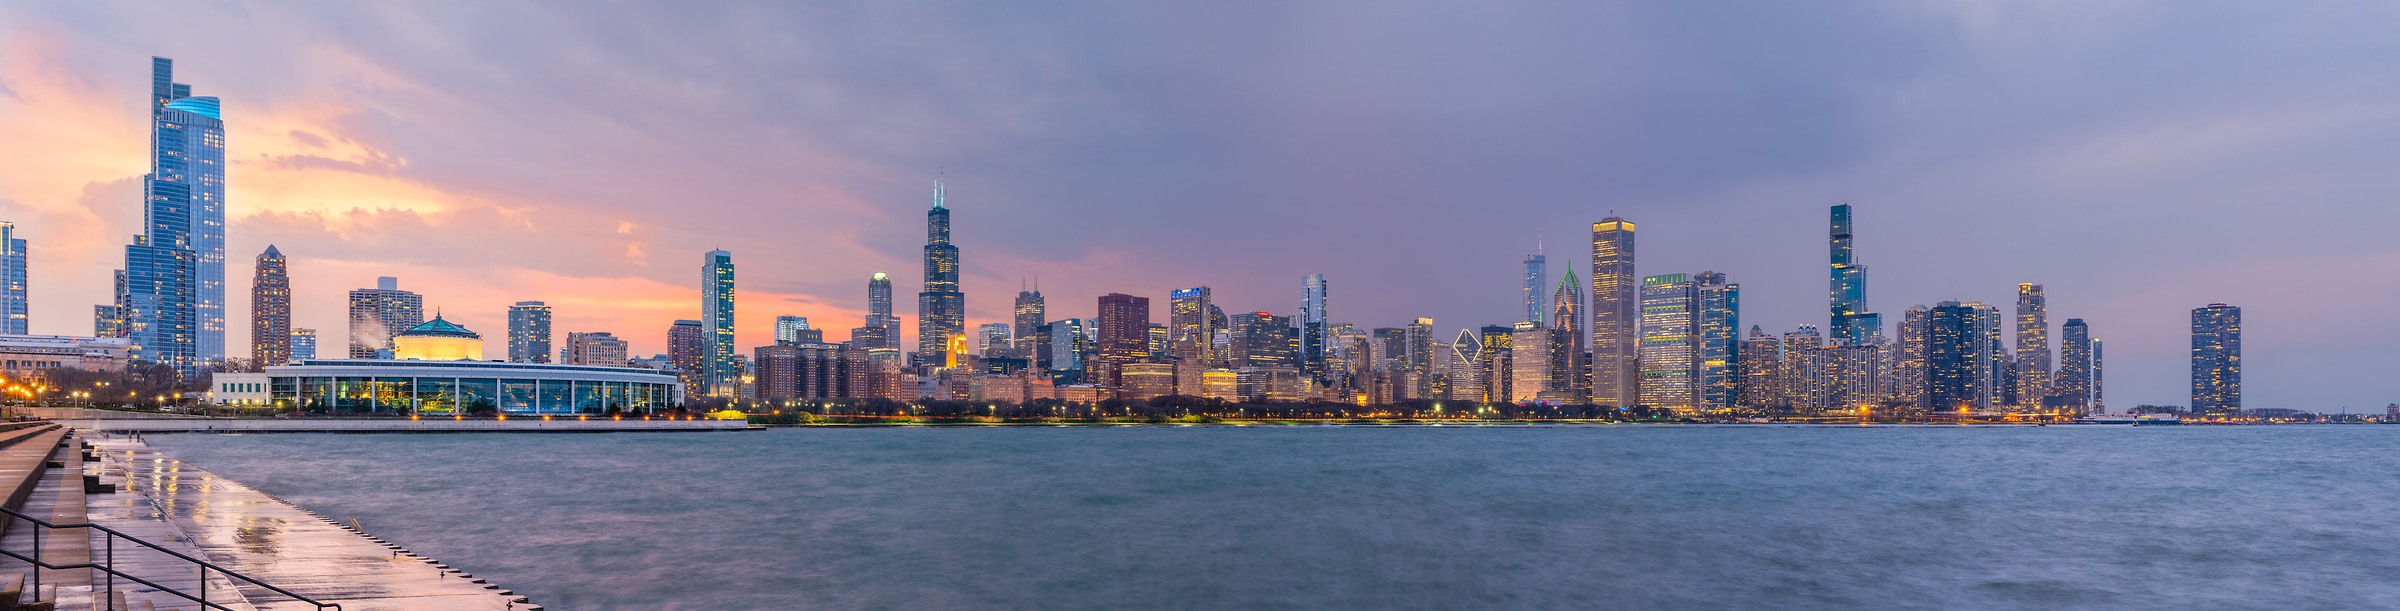 813 megapixels! A very high resolution, large-format VAST photo print of the Chicago skyline at sunset; cityscape photograph created by Chris Blake in Chicago, Illinois